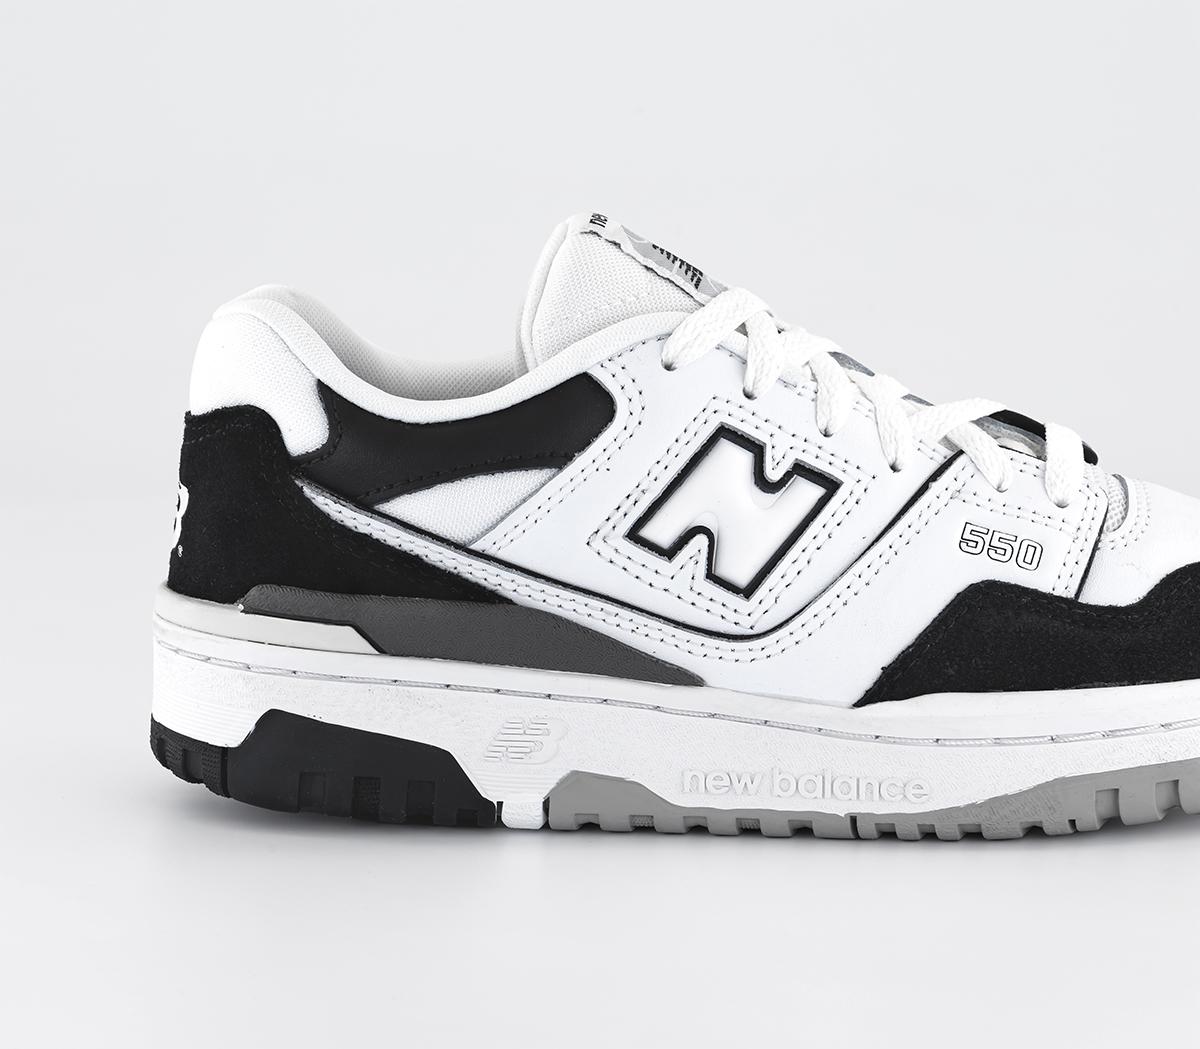 New Balance BB550 GS Trainers White Black - Women's Trainers